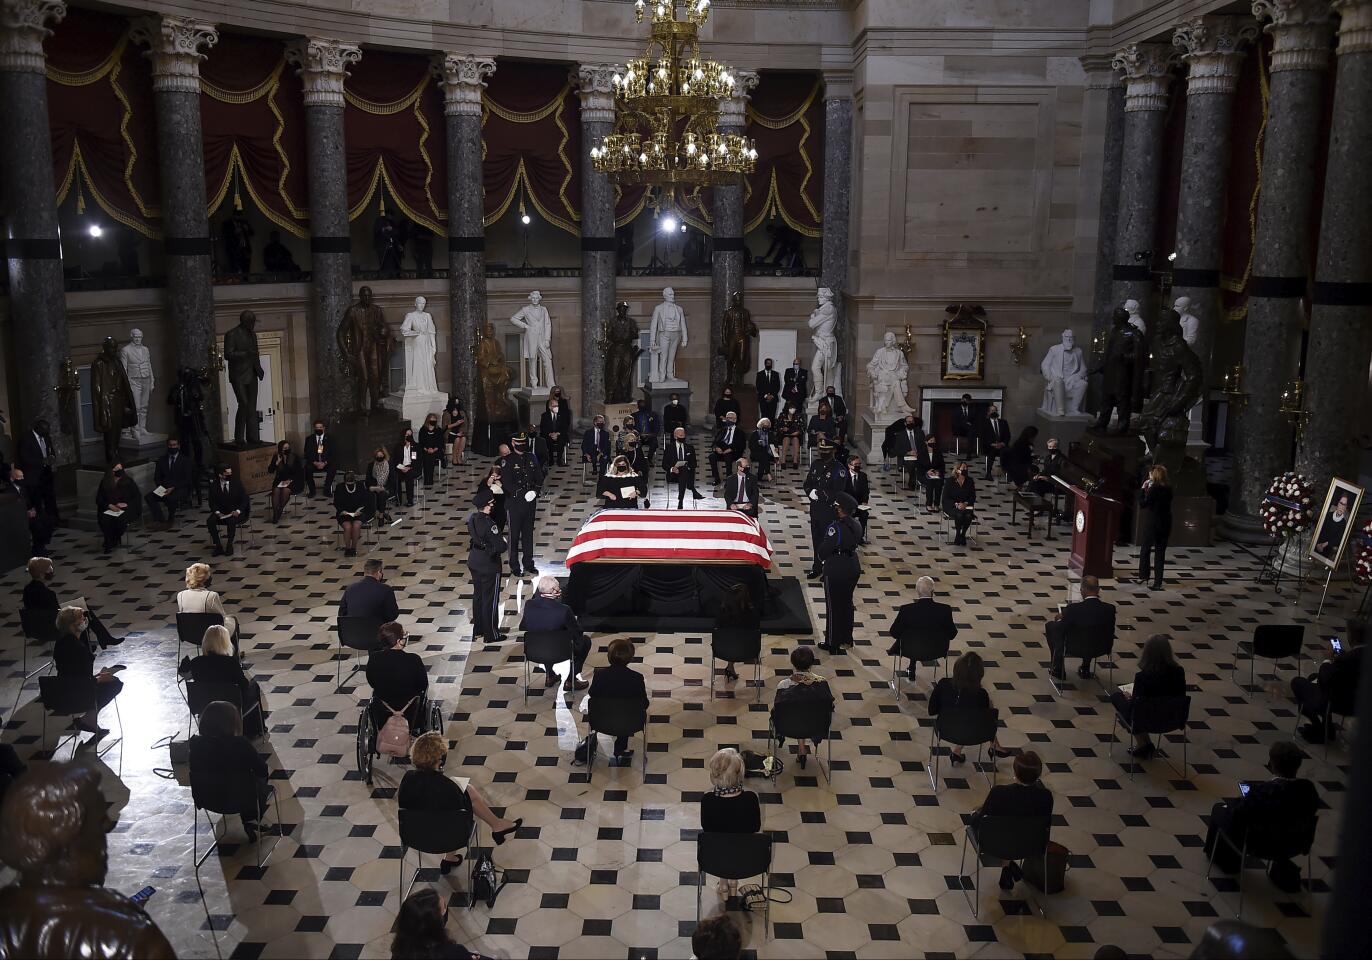 Supreme Court Justice Ruth Bader Ginsburg lies in state in Statuary Hall of the U.S. Capitol